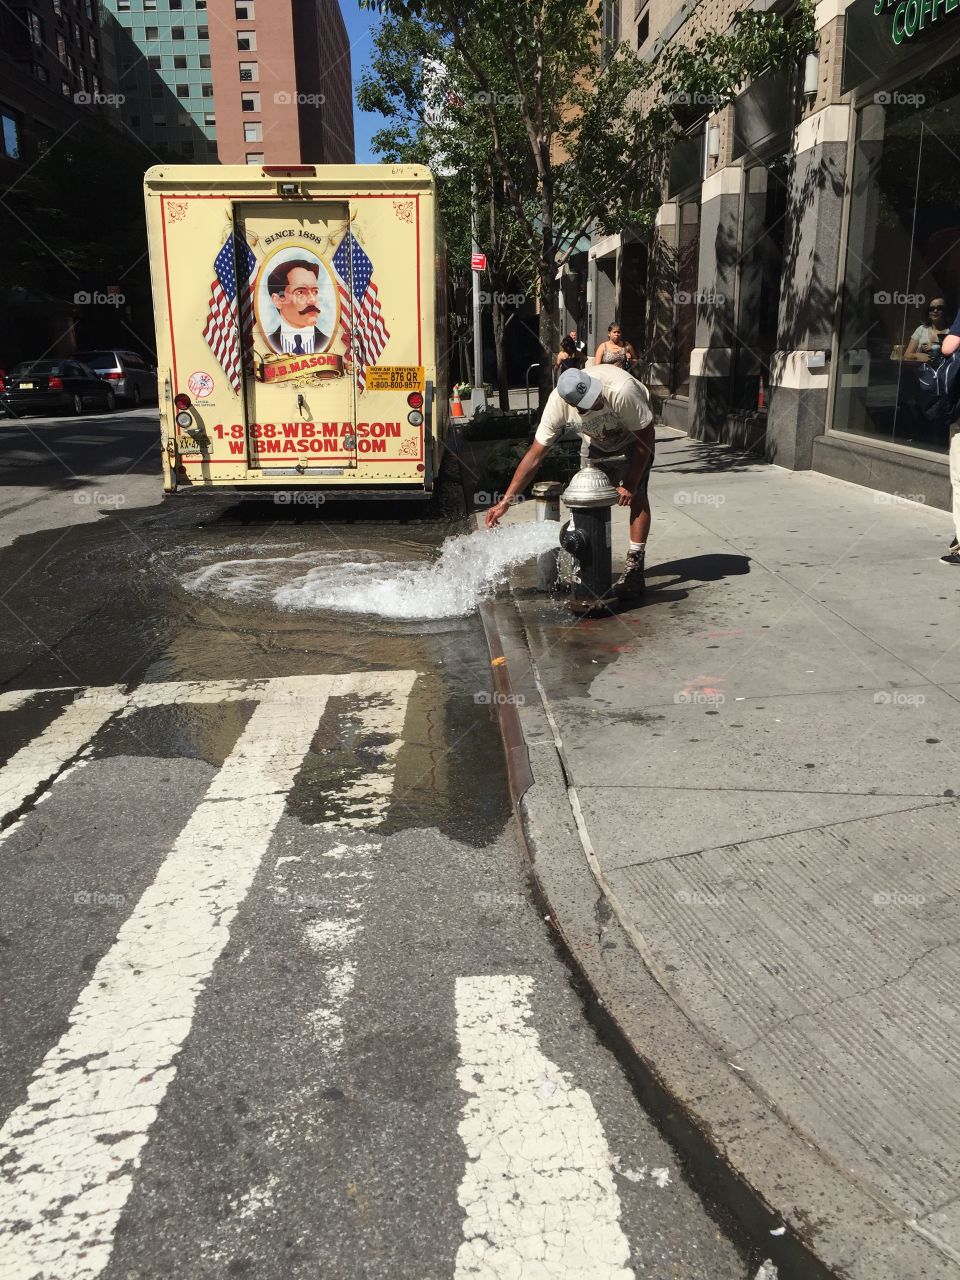 Wasting water in NYC